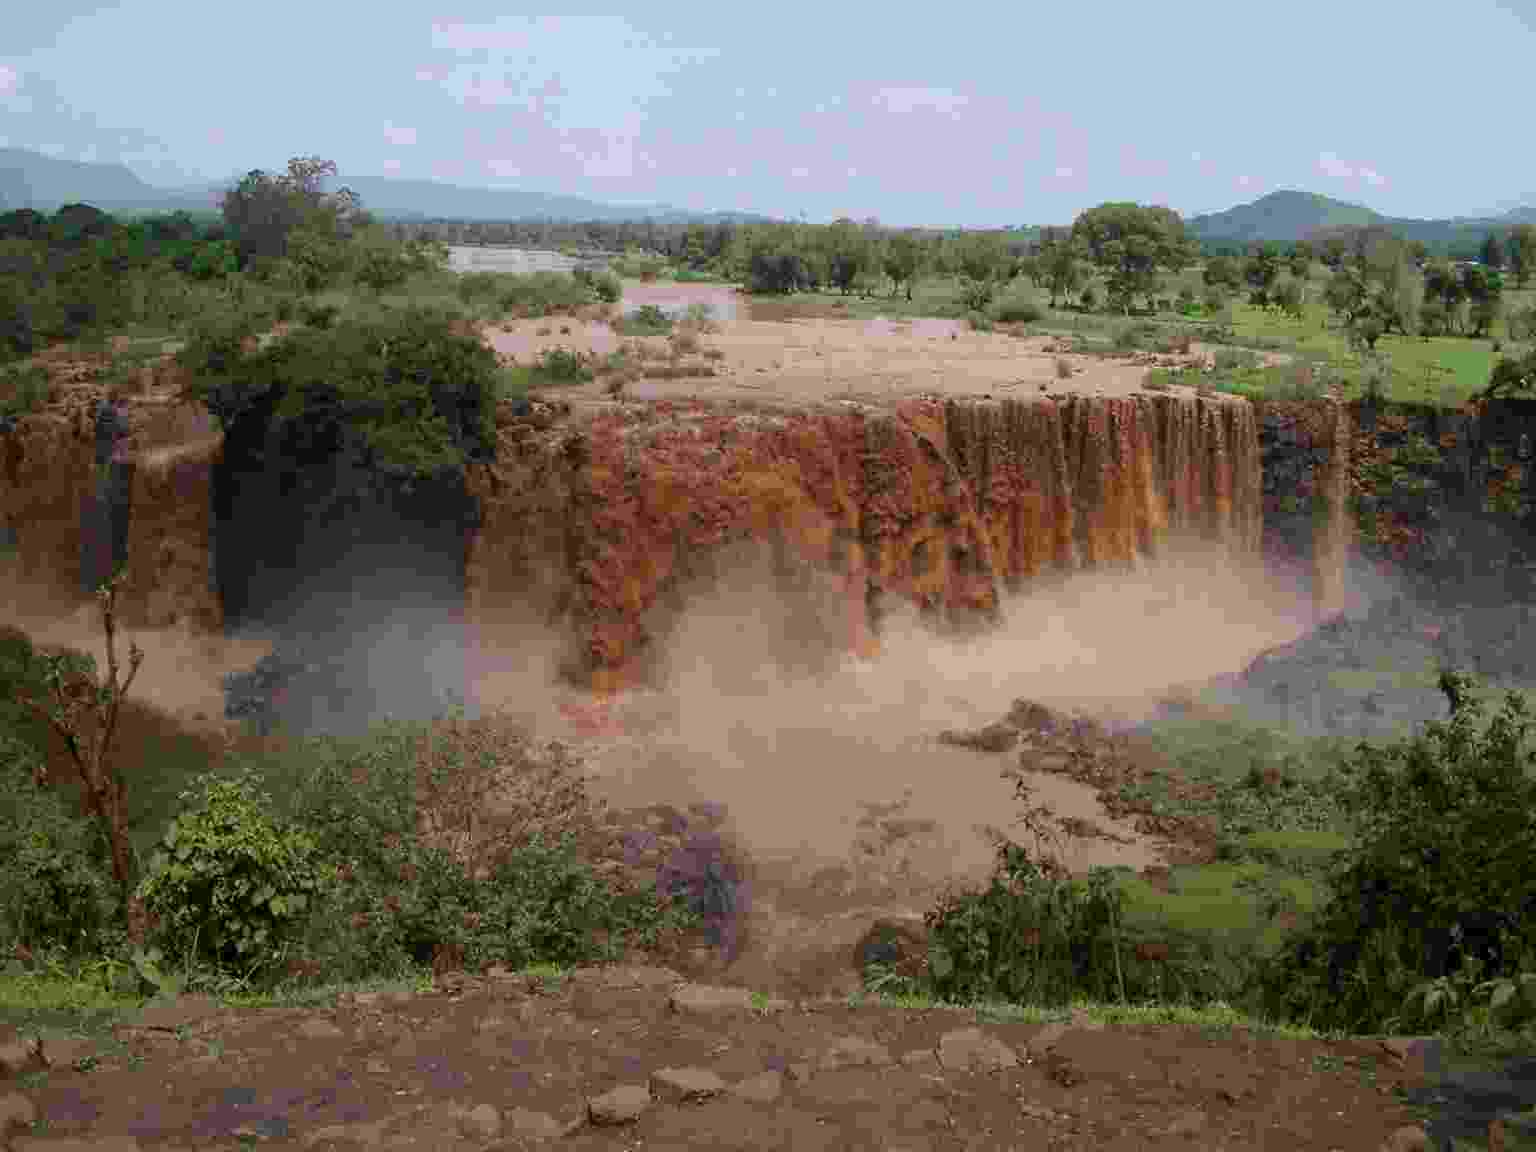 The Abbay River cascades down the Nile Fall during the monsoon season; the water is coloured red from soil and sediment collected along it's fast-flowing path